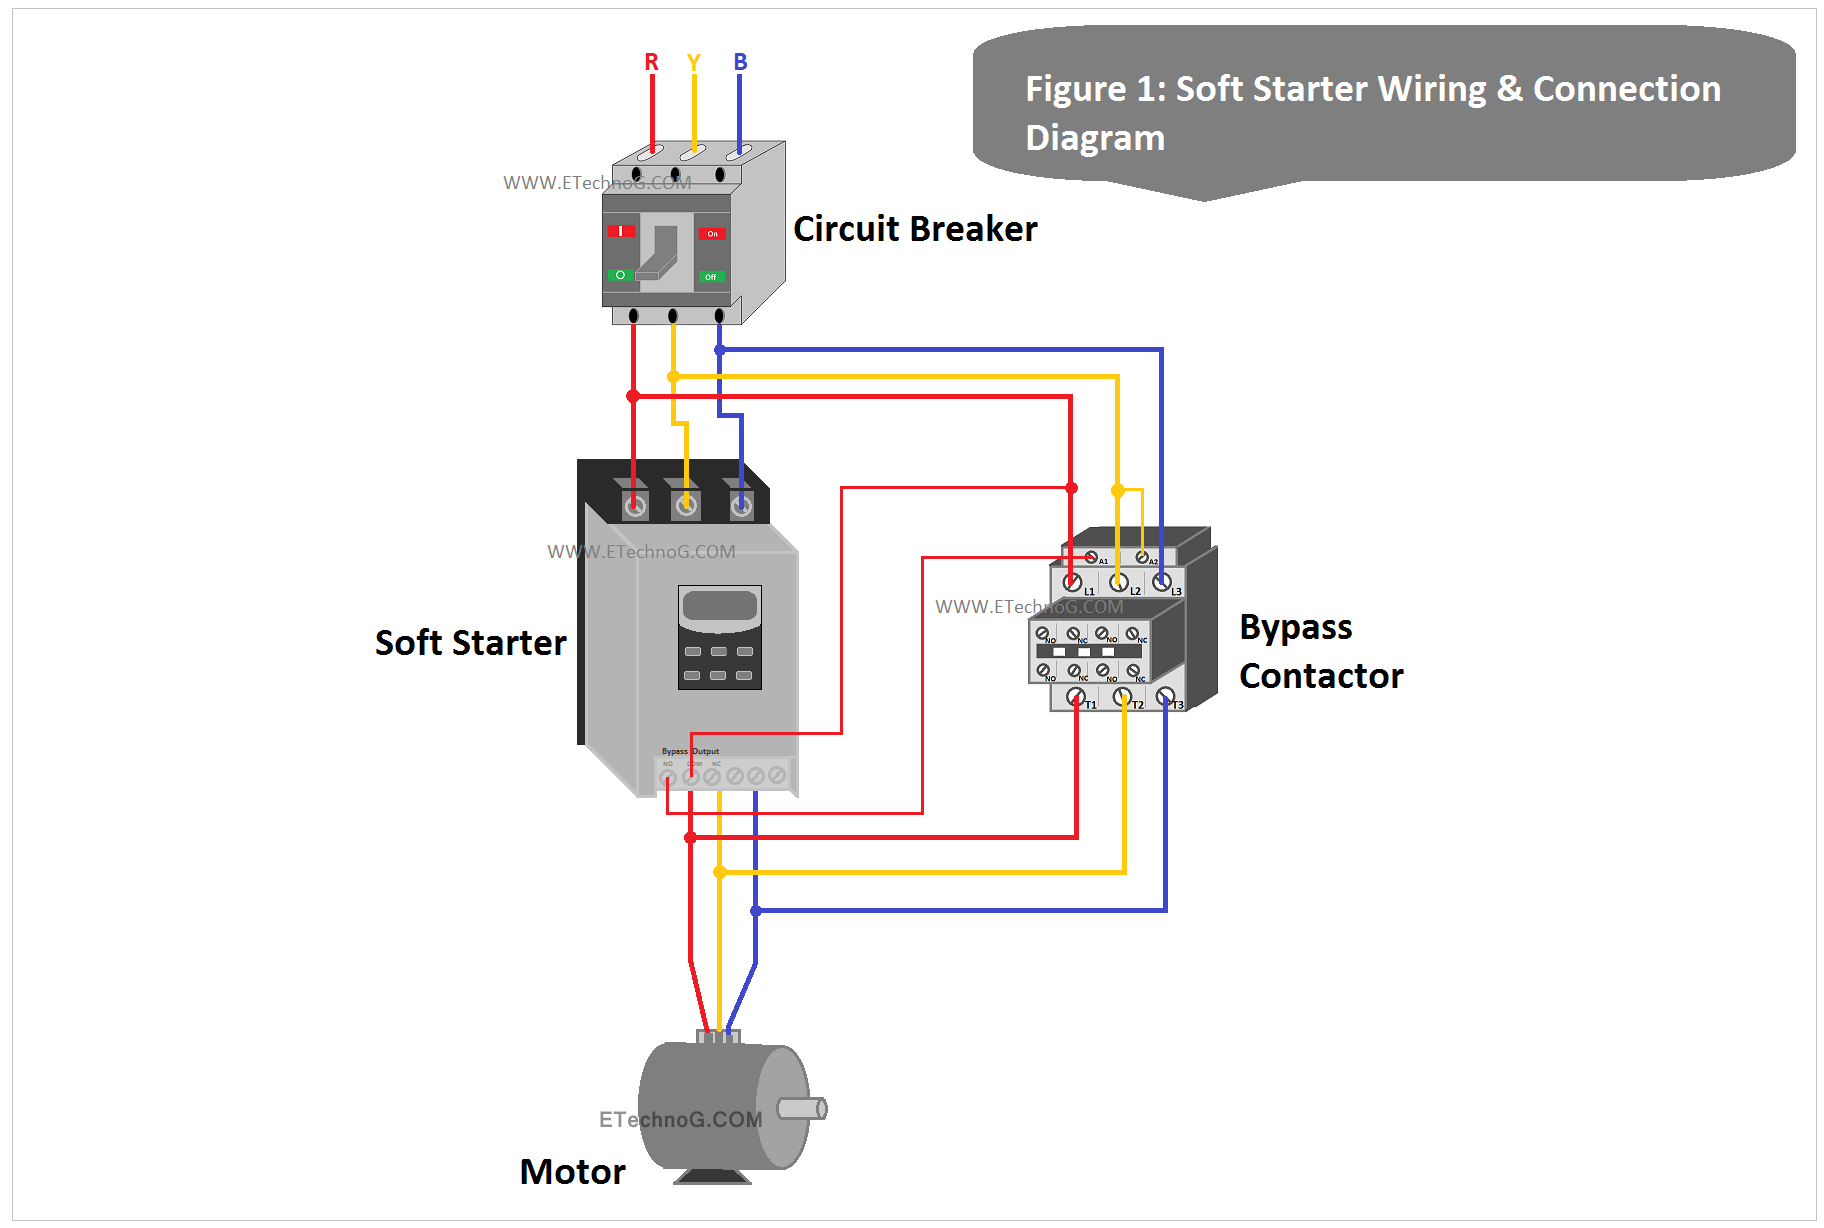 Soft Starter Wiring and Connection Diagram